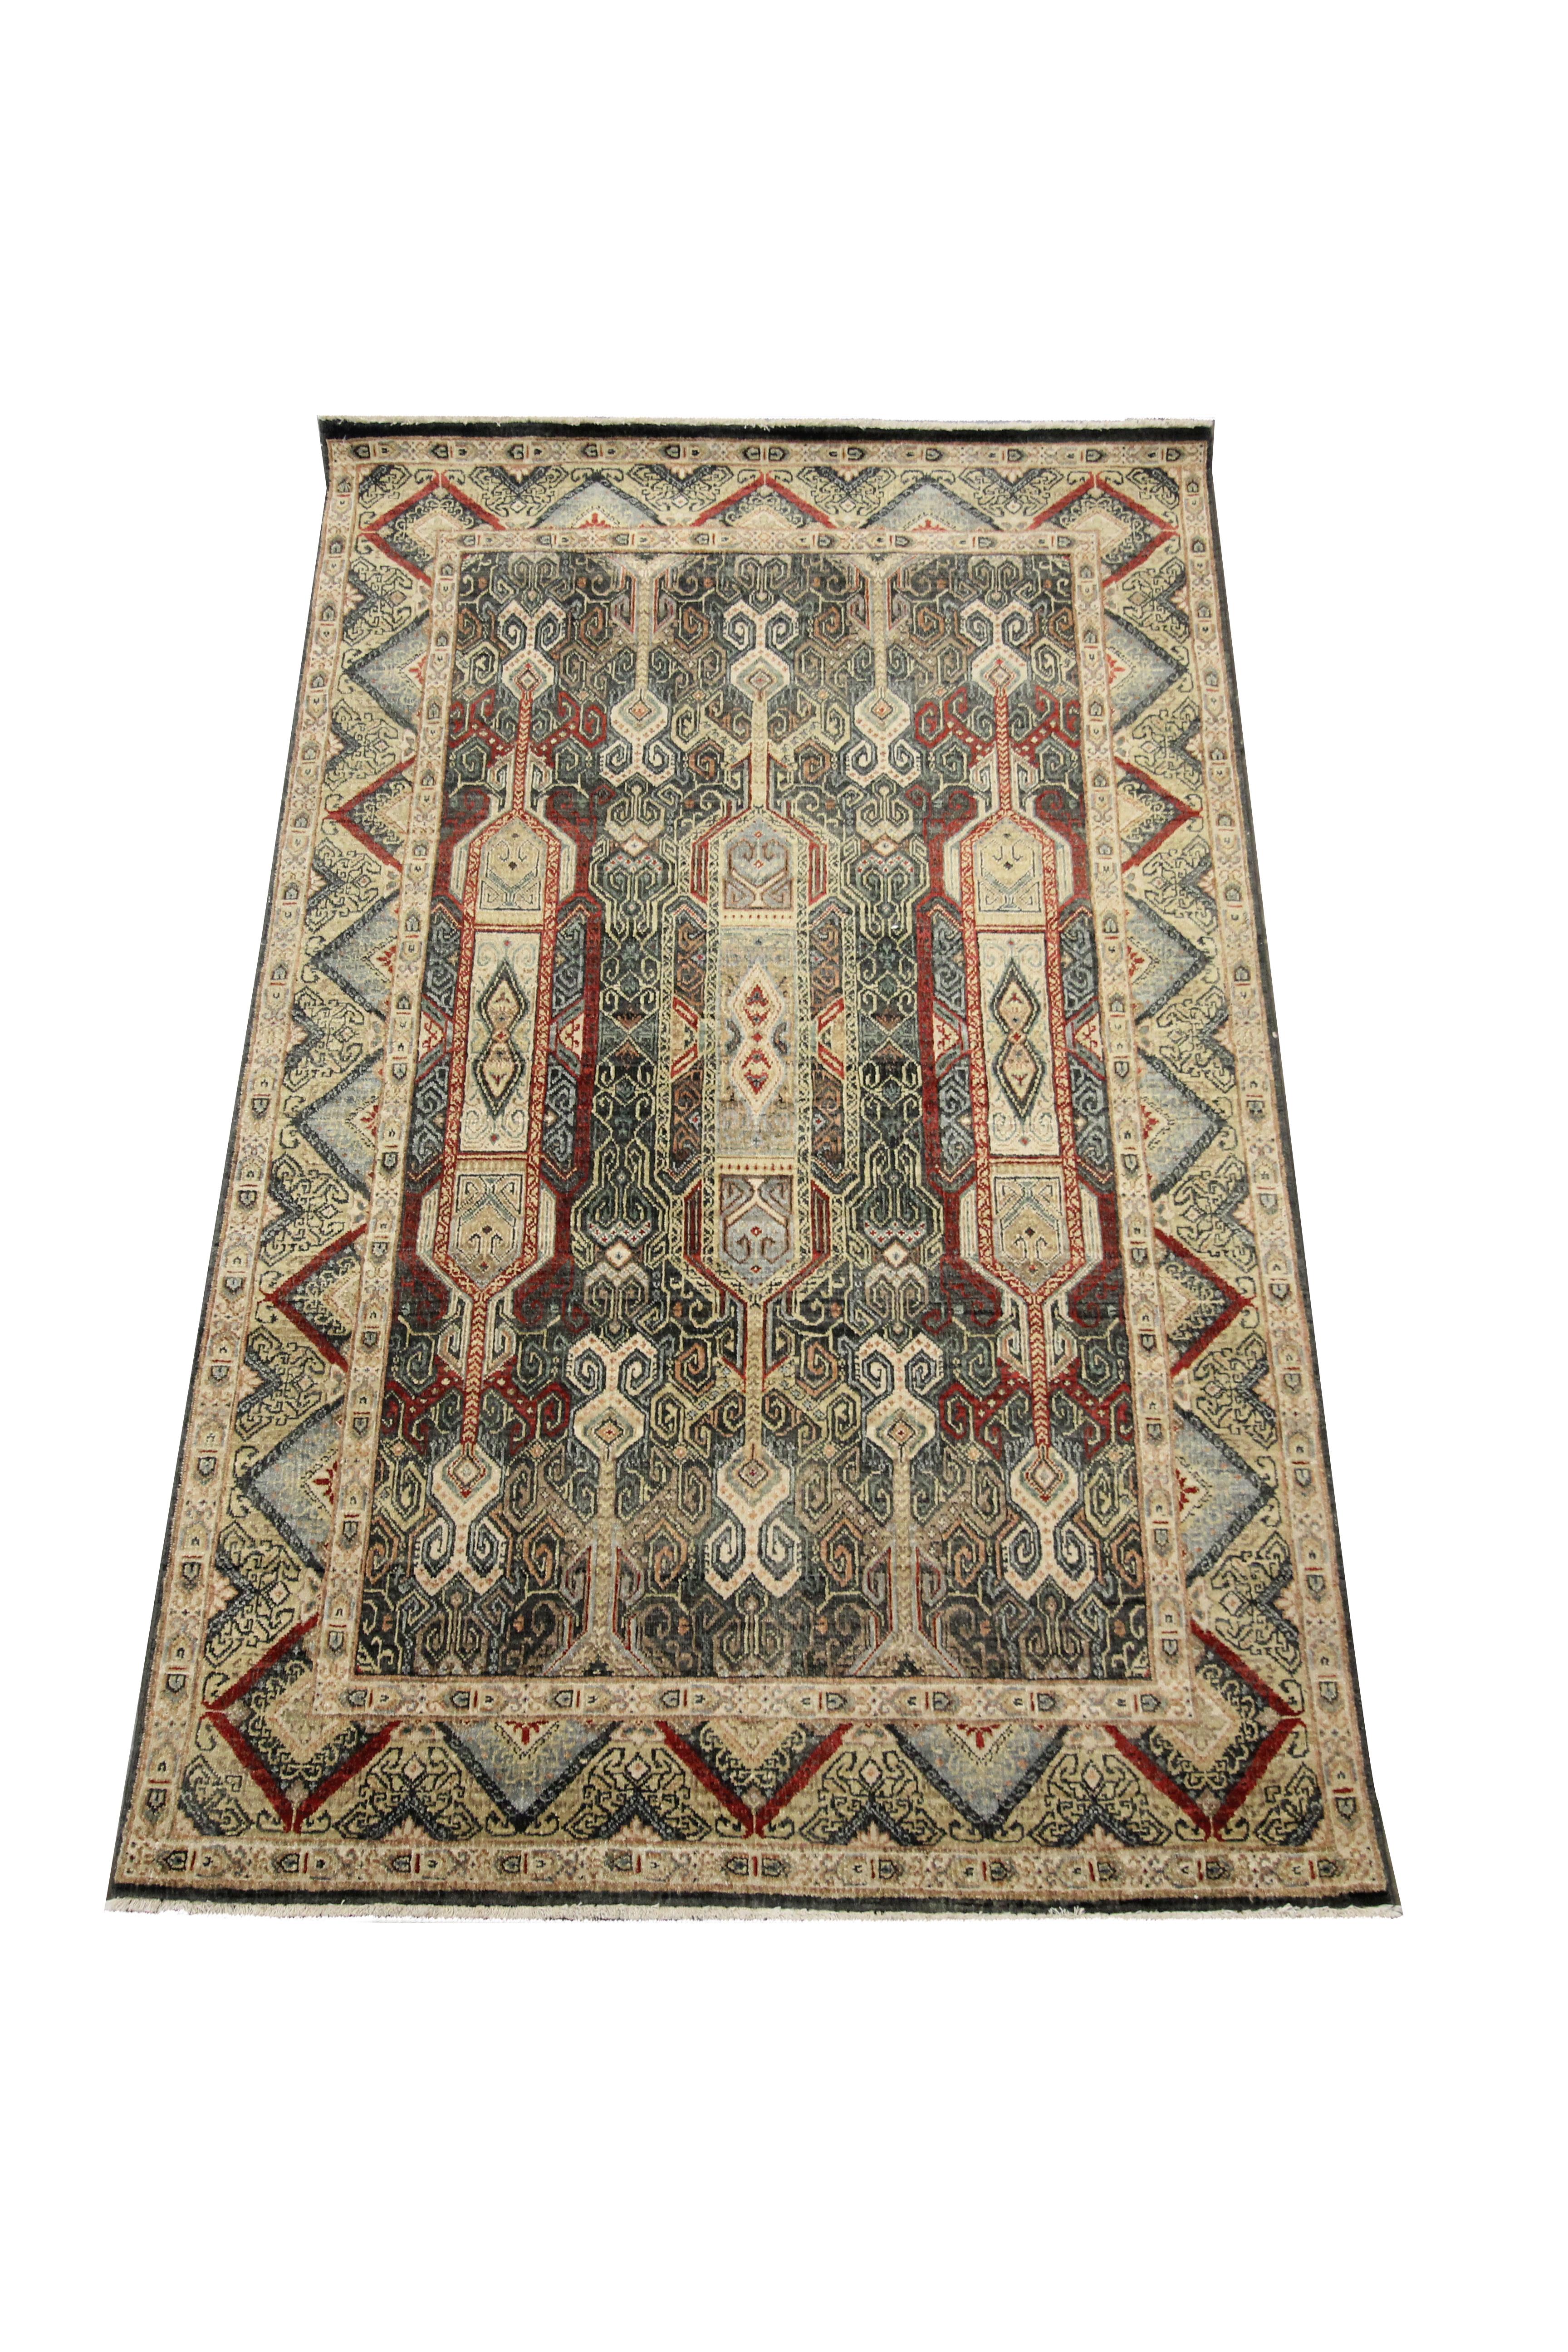 This traditional medallion carpet was woven by hand in India in the early 21st century. The design features a large red medallion woven with floral details throughout. Blue, brown and green accents then make up the decorative details and repeating